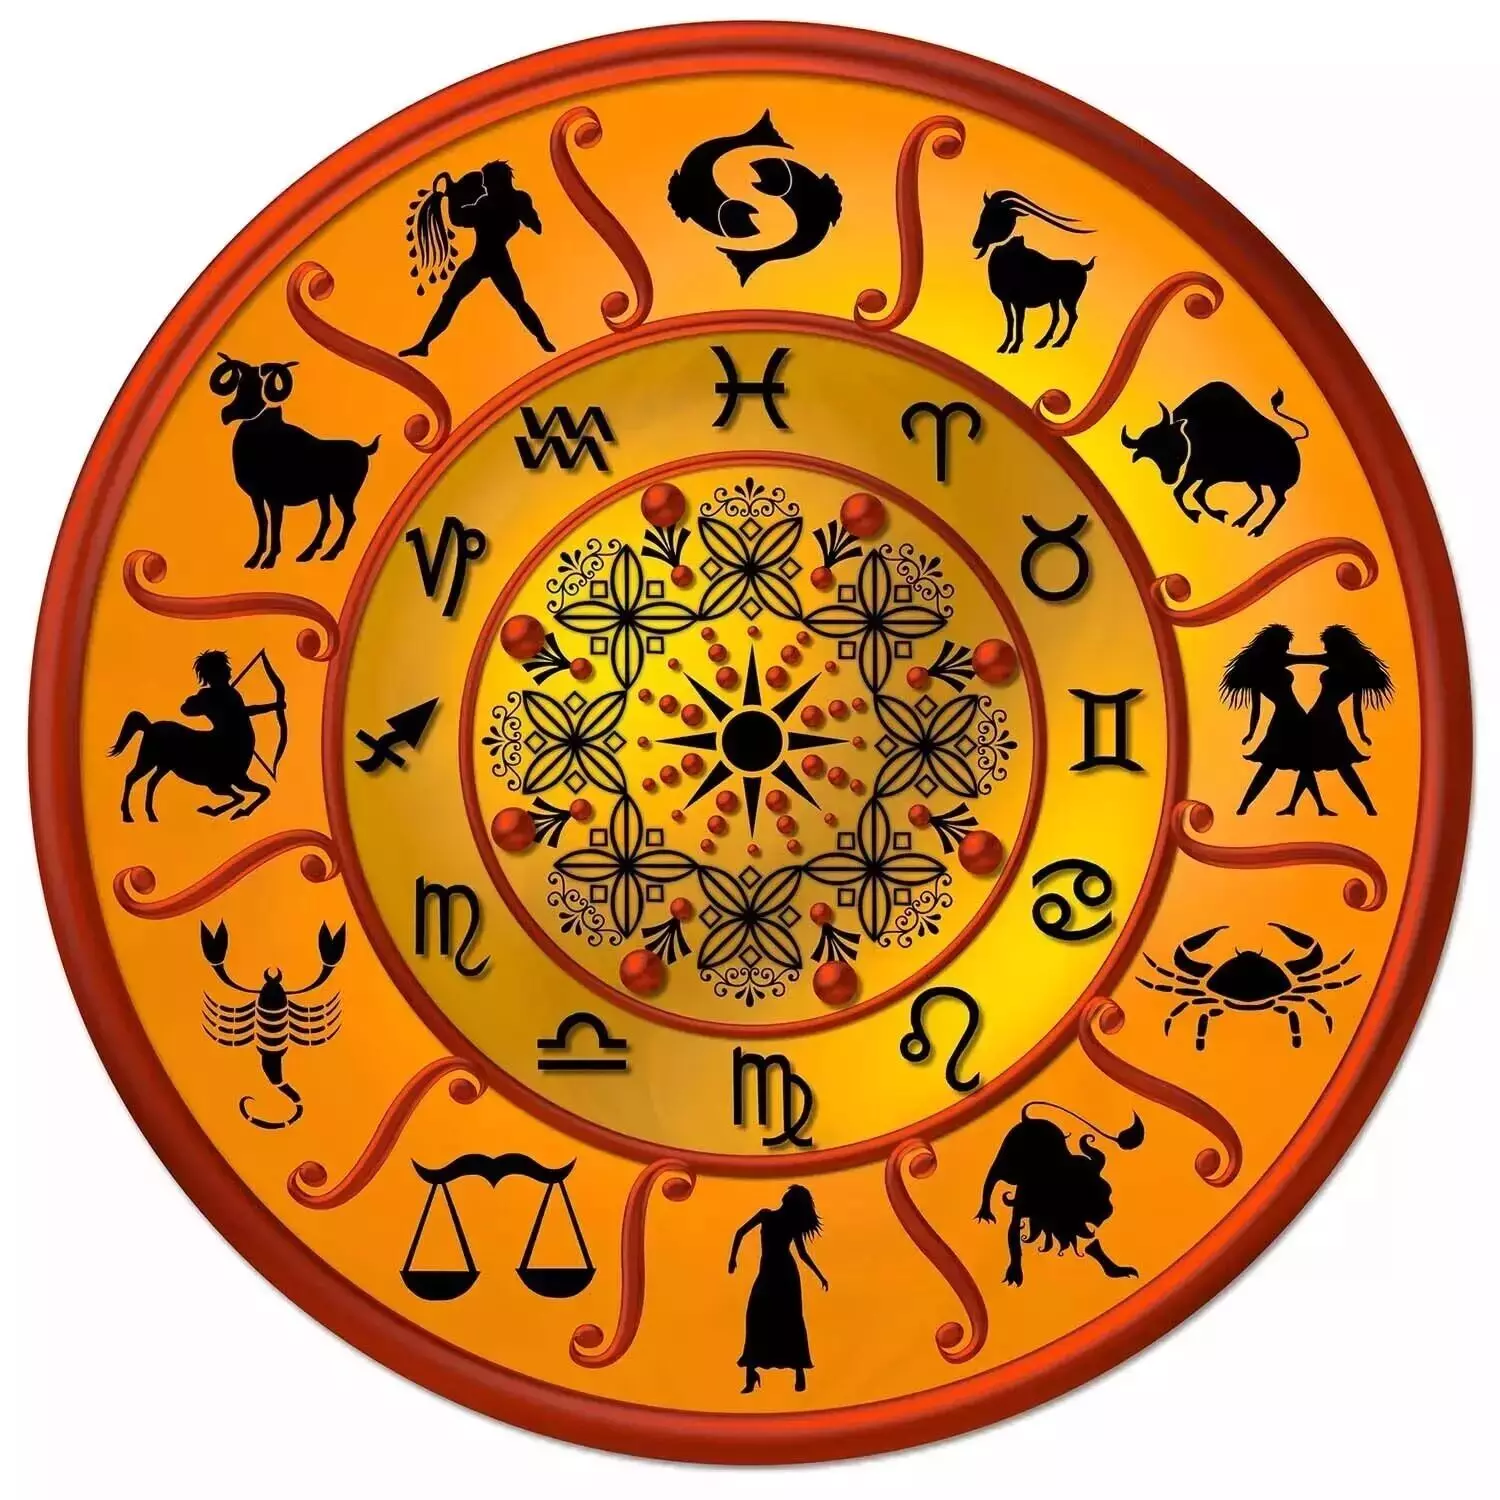 22 September – Know your todays horoscope